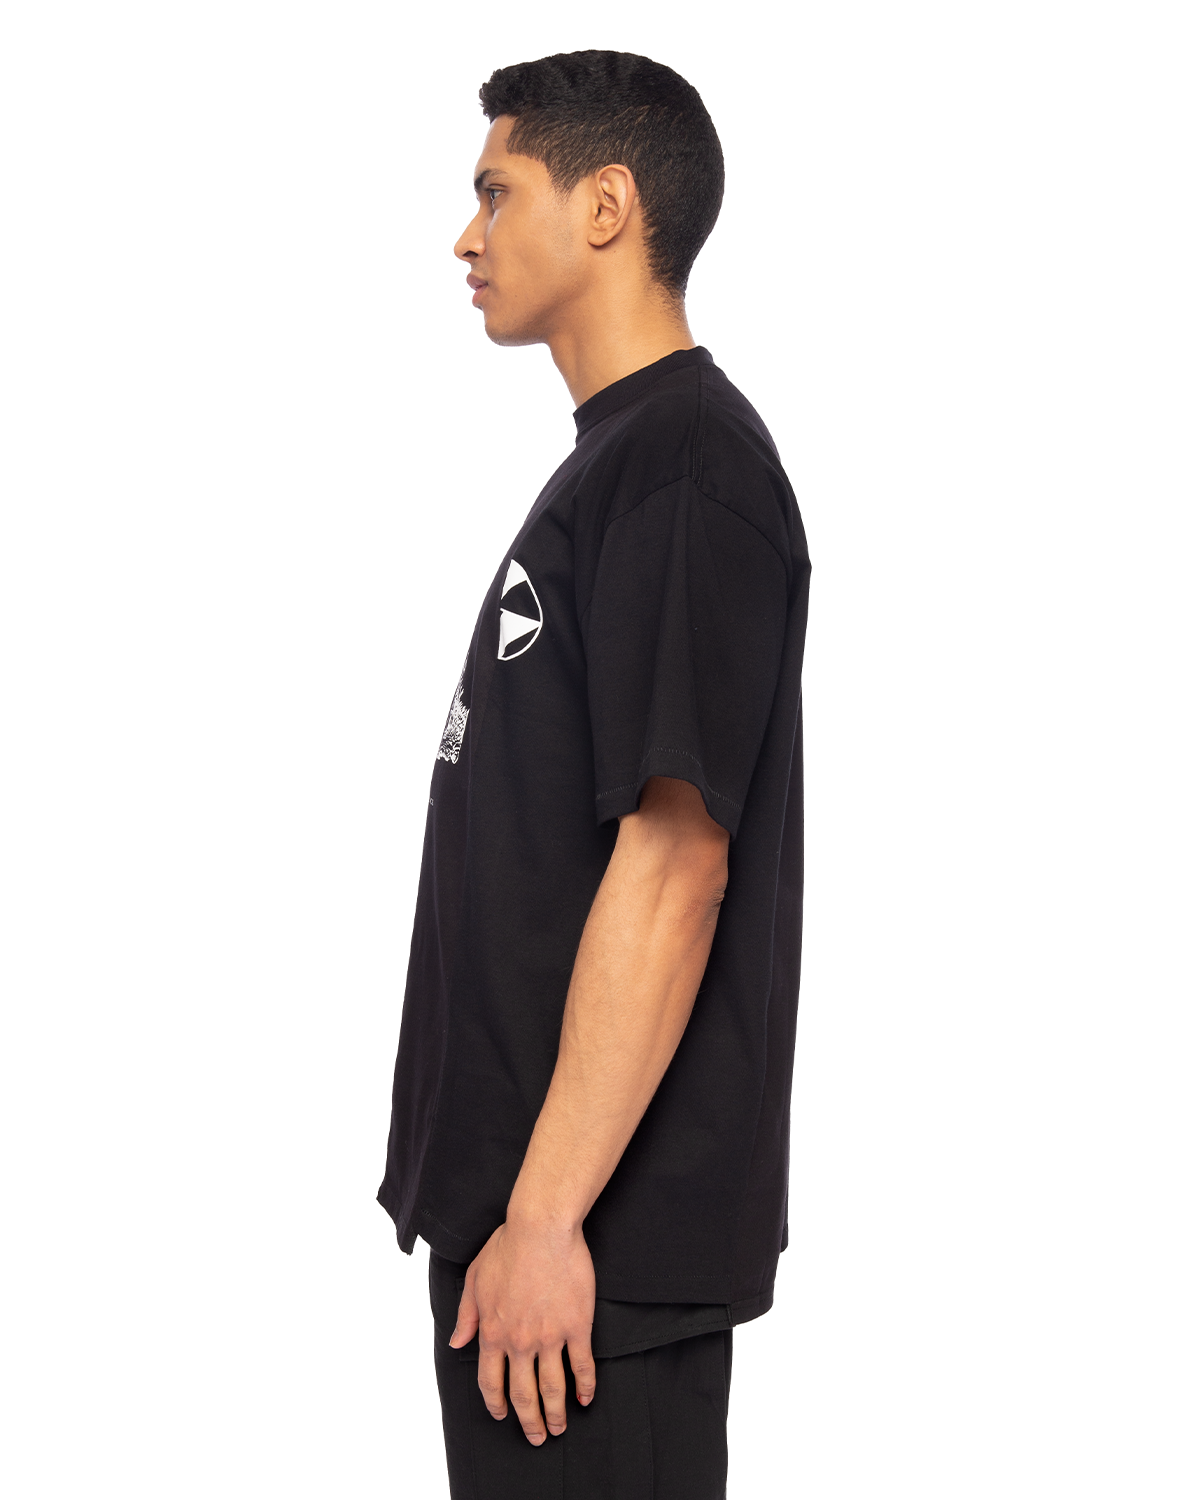 Form & Function SS22 Reconstructed T-Shirt Black